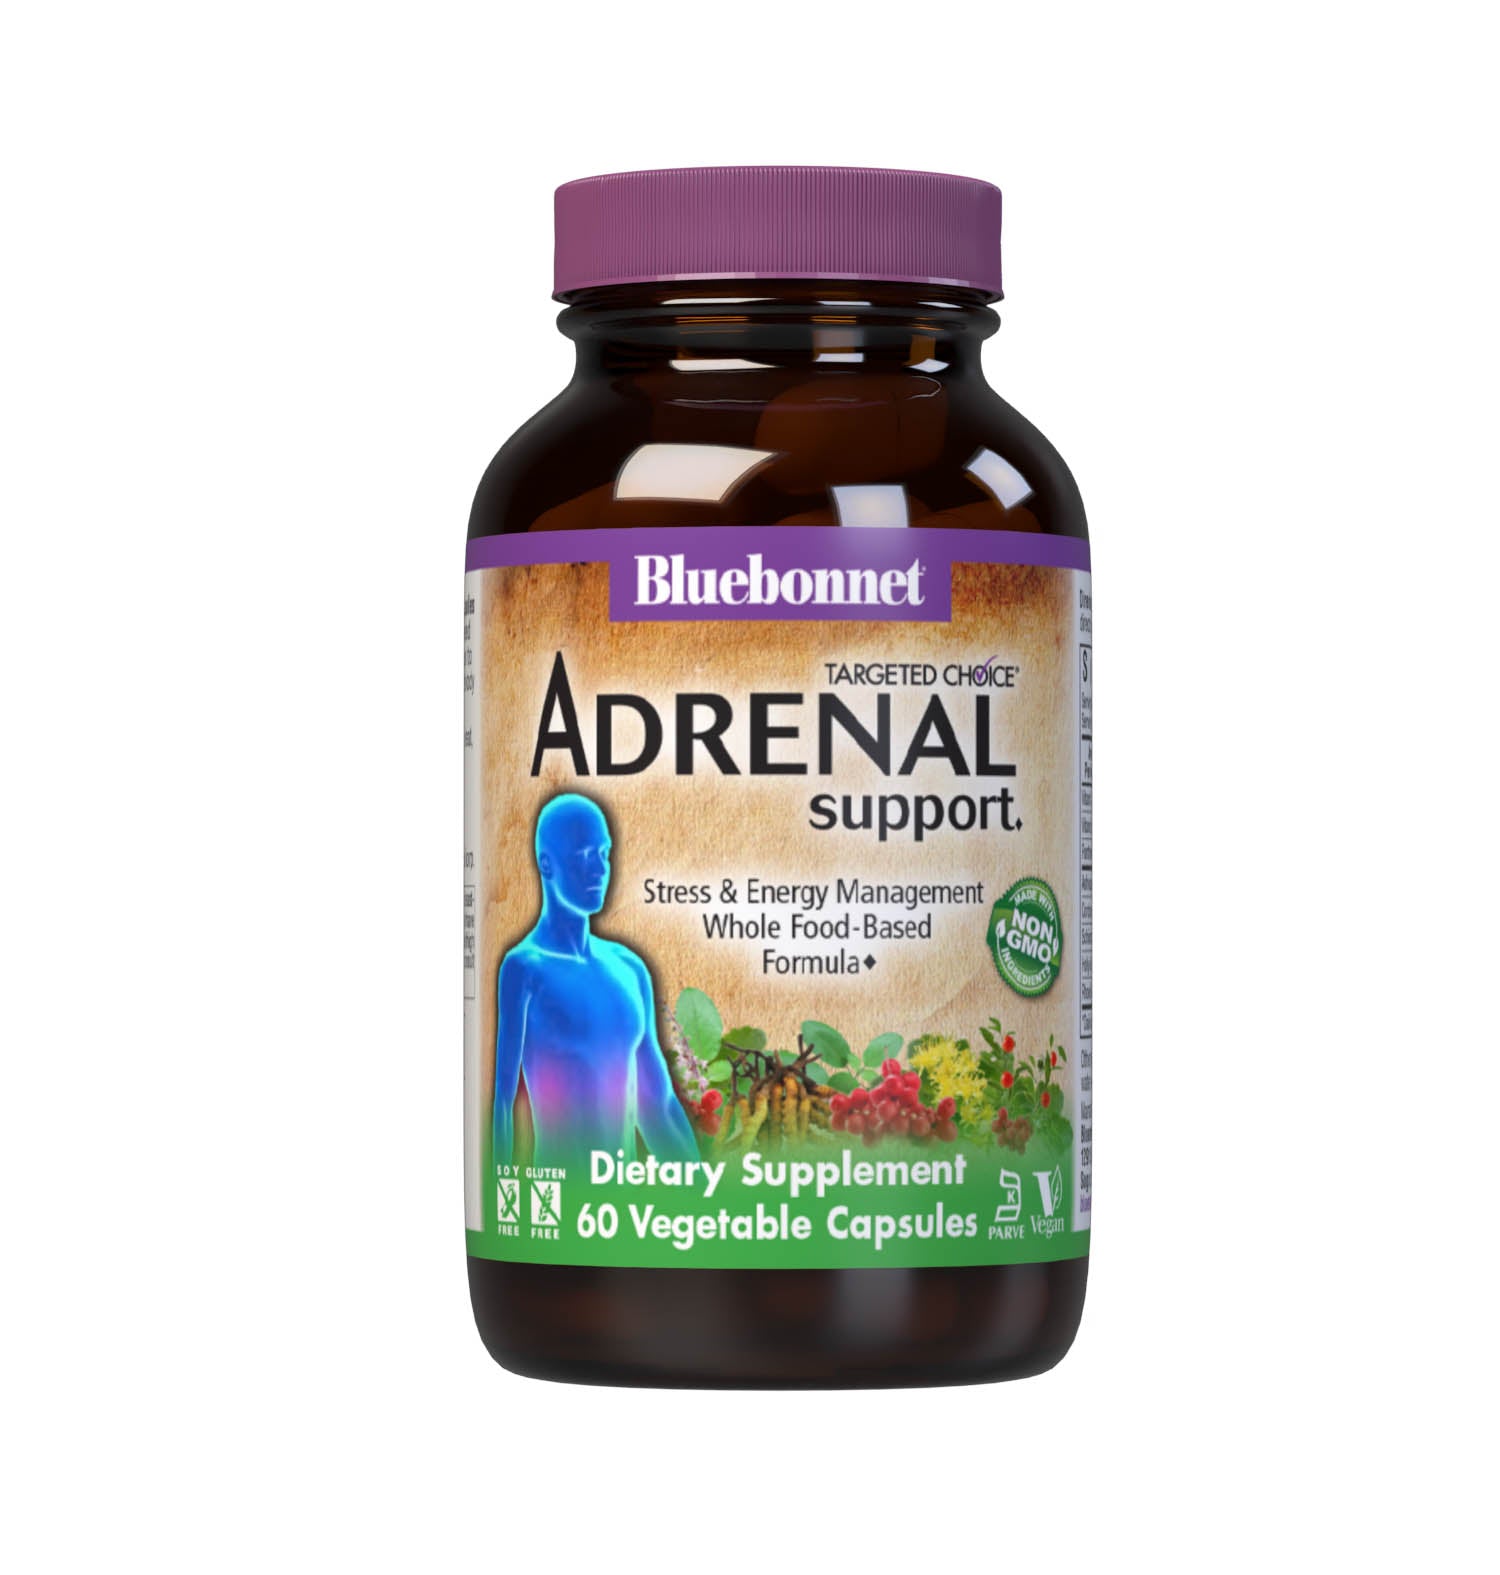 Bluebonnet’s Targeted Choice Adrenal Support 60 Vegetable Capsules are specially formulated with a unique blend of sustainably harvested or wildcrafted herbal extracts that help promote a healthy response to stress while also maintaining healthy energy levels. Essential nutrients important for the normal production of adrenal hormones were also incorporated to optimize adrenal gland function critical to helping the body adapt to stress in a balanced way. #size_60 count